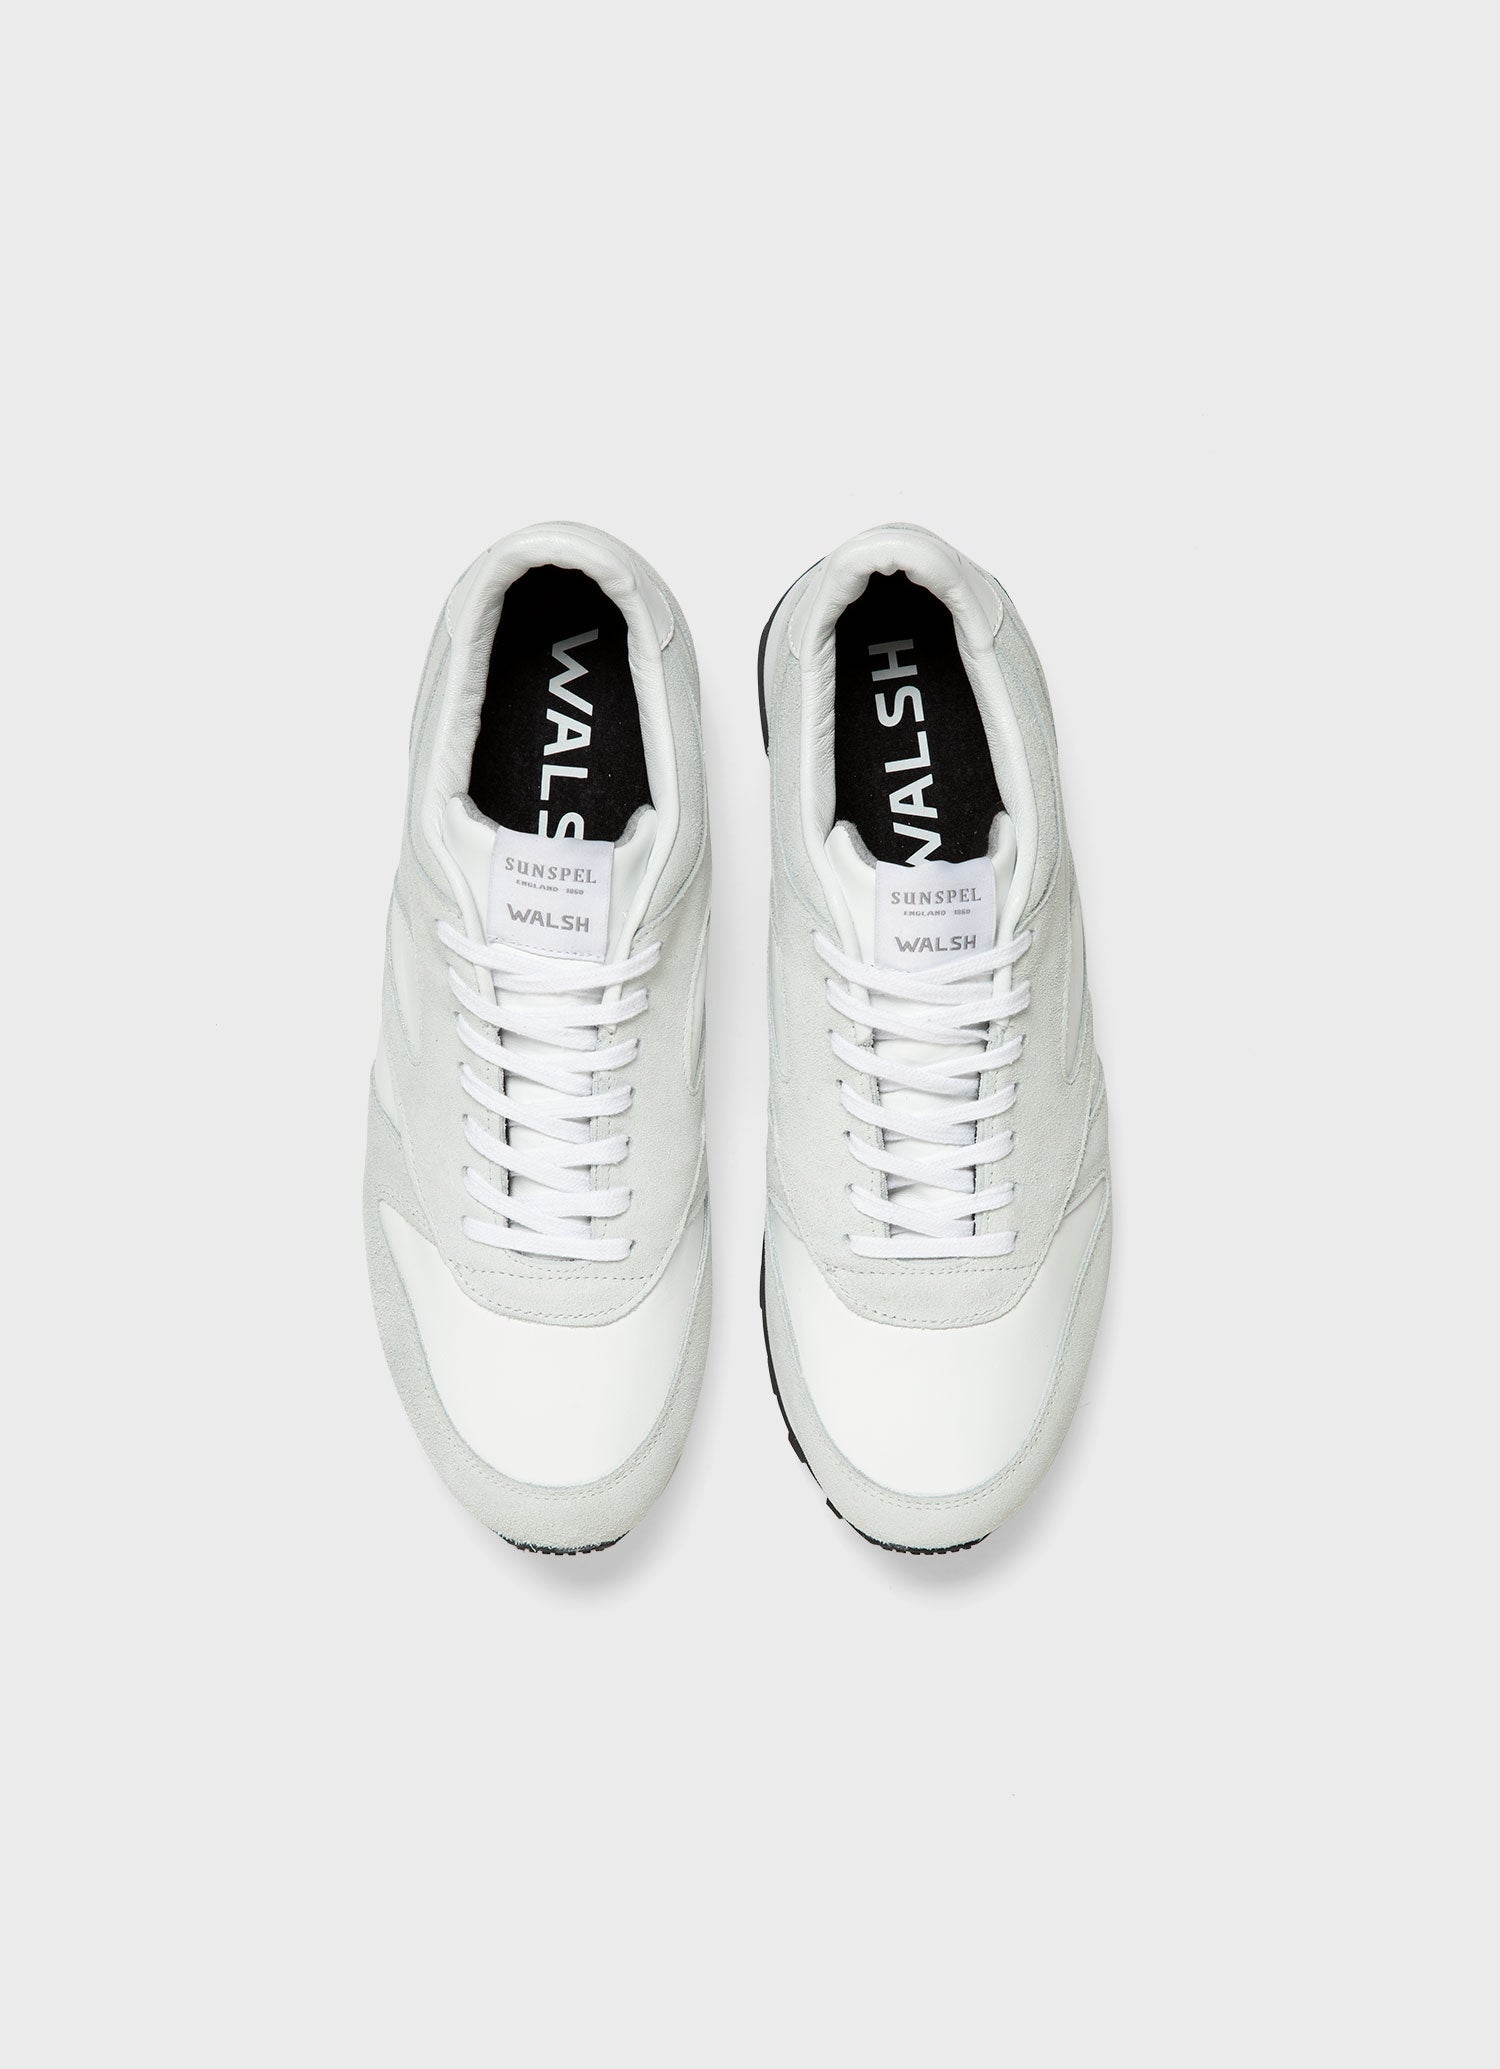 Sunspel and Walsh Trainer in White